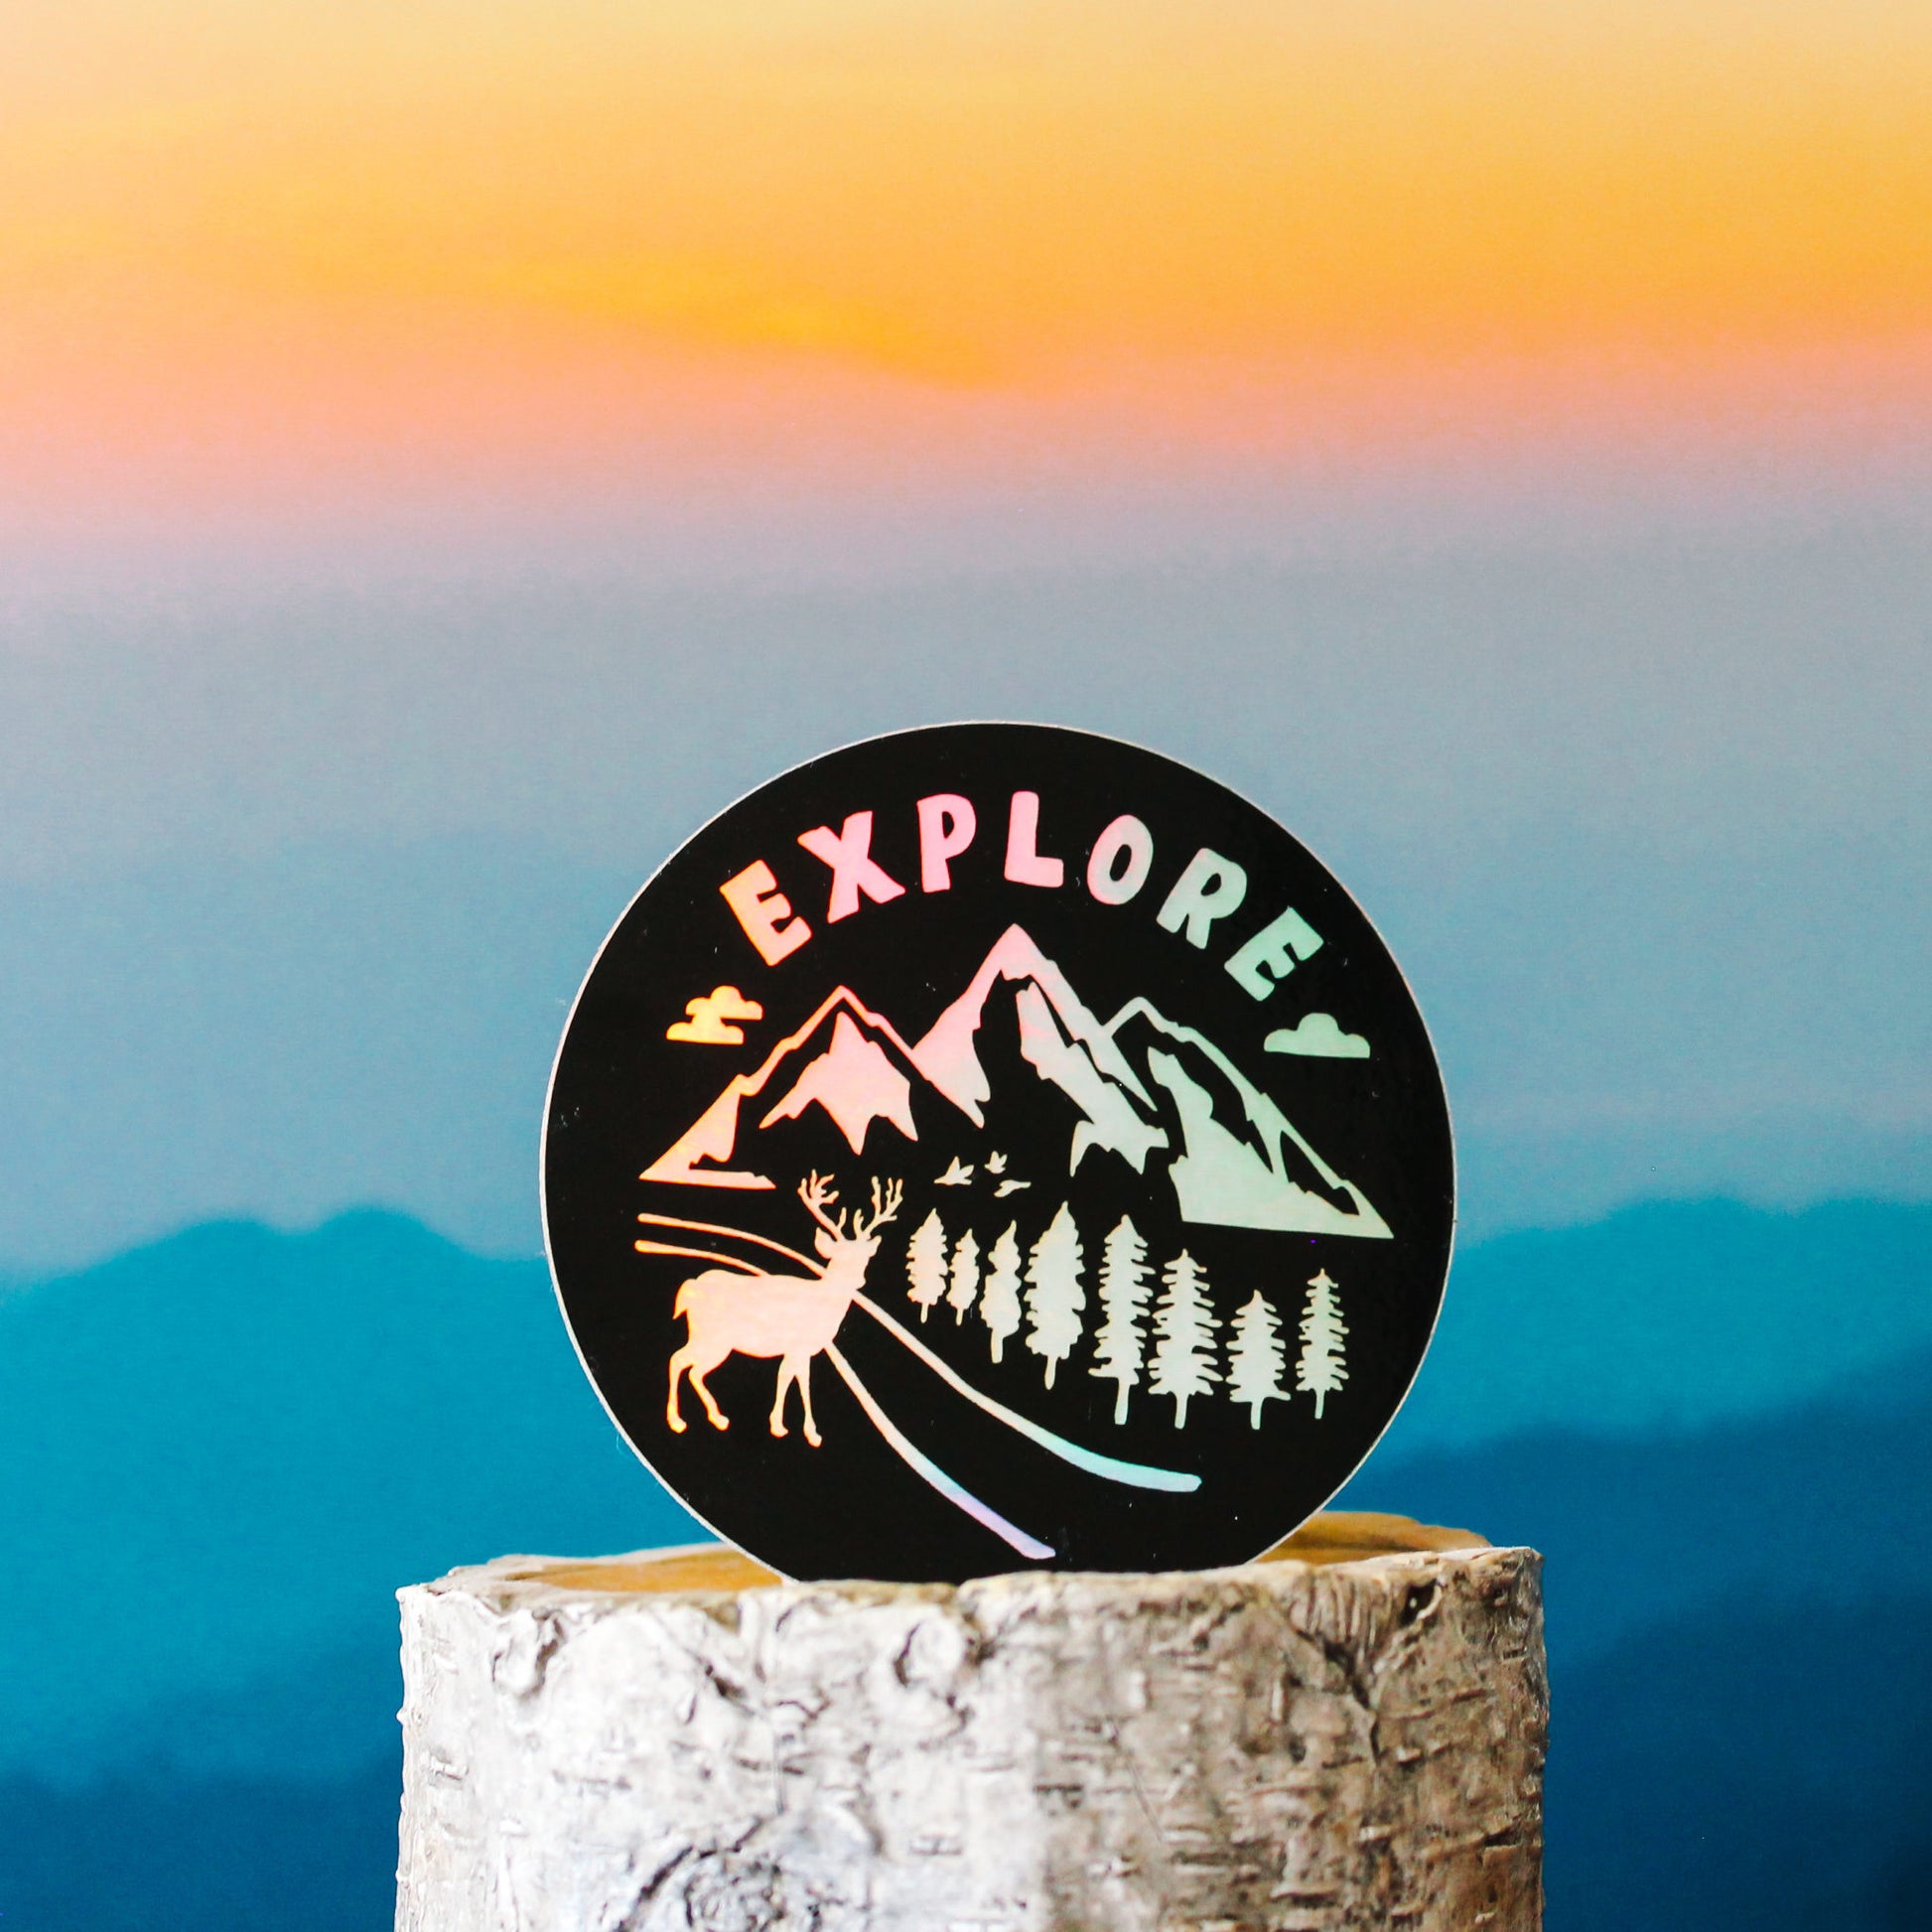 black and rainbow holographic sticker with outdoors and forest scenery with text "explore"